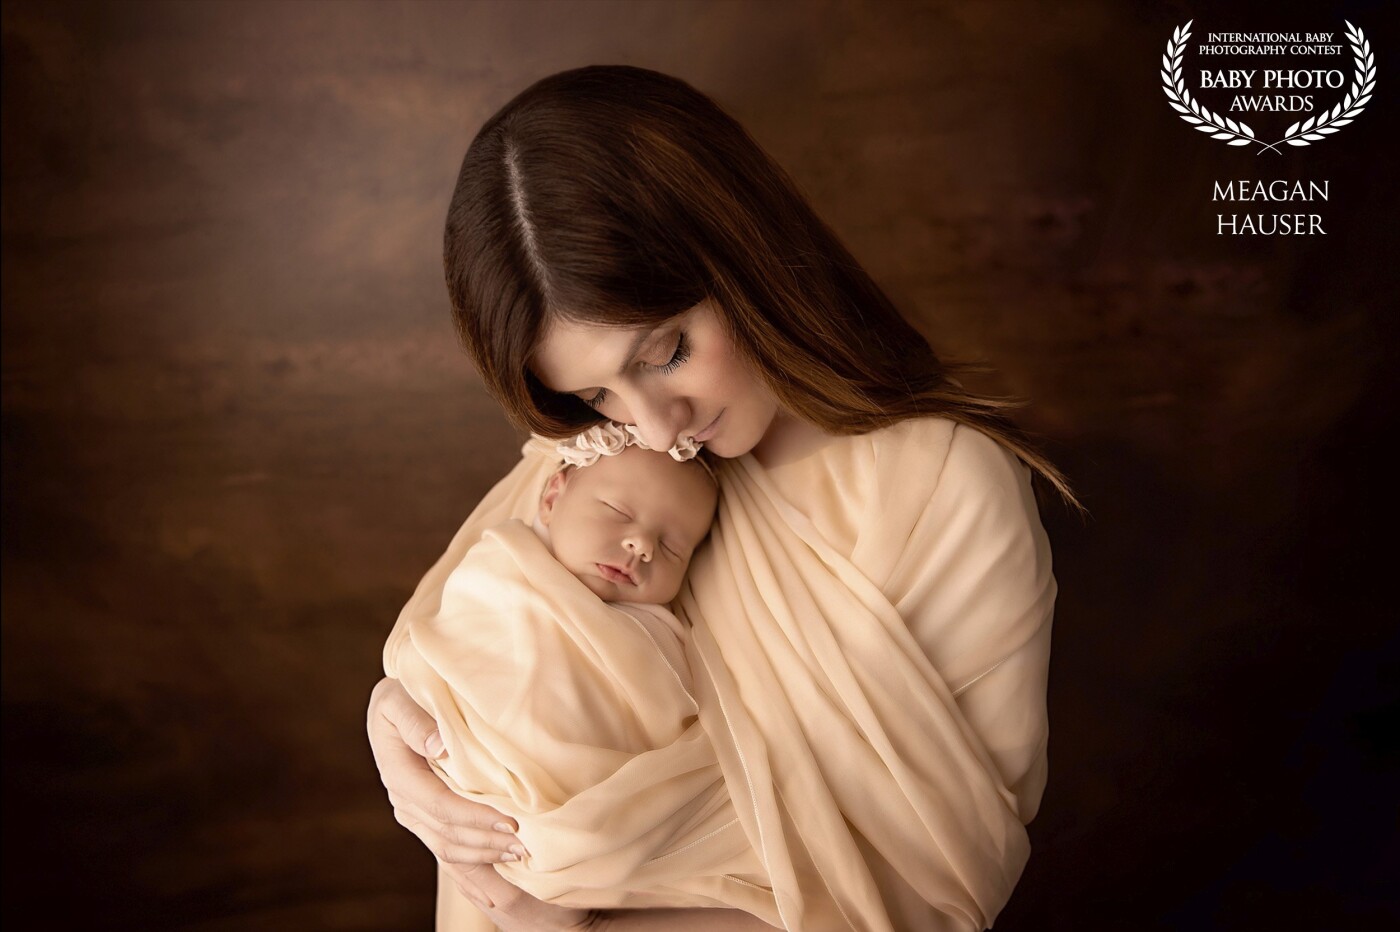 "A mother holds her child's hand for just a short time, but holds their hearts forever"<br />
<br />
This was the quote that inspired this photo. I wanted to take a photo that showed the bond and true love between a mother and her baby!